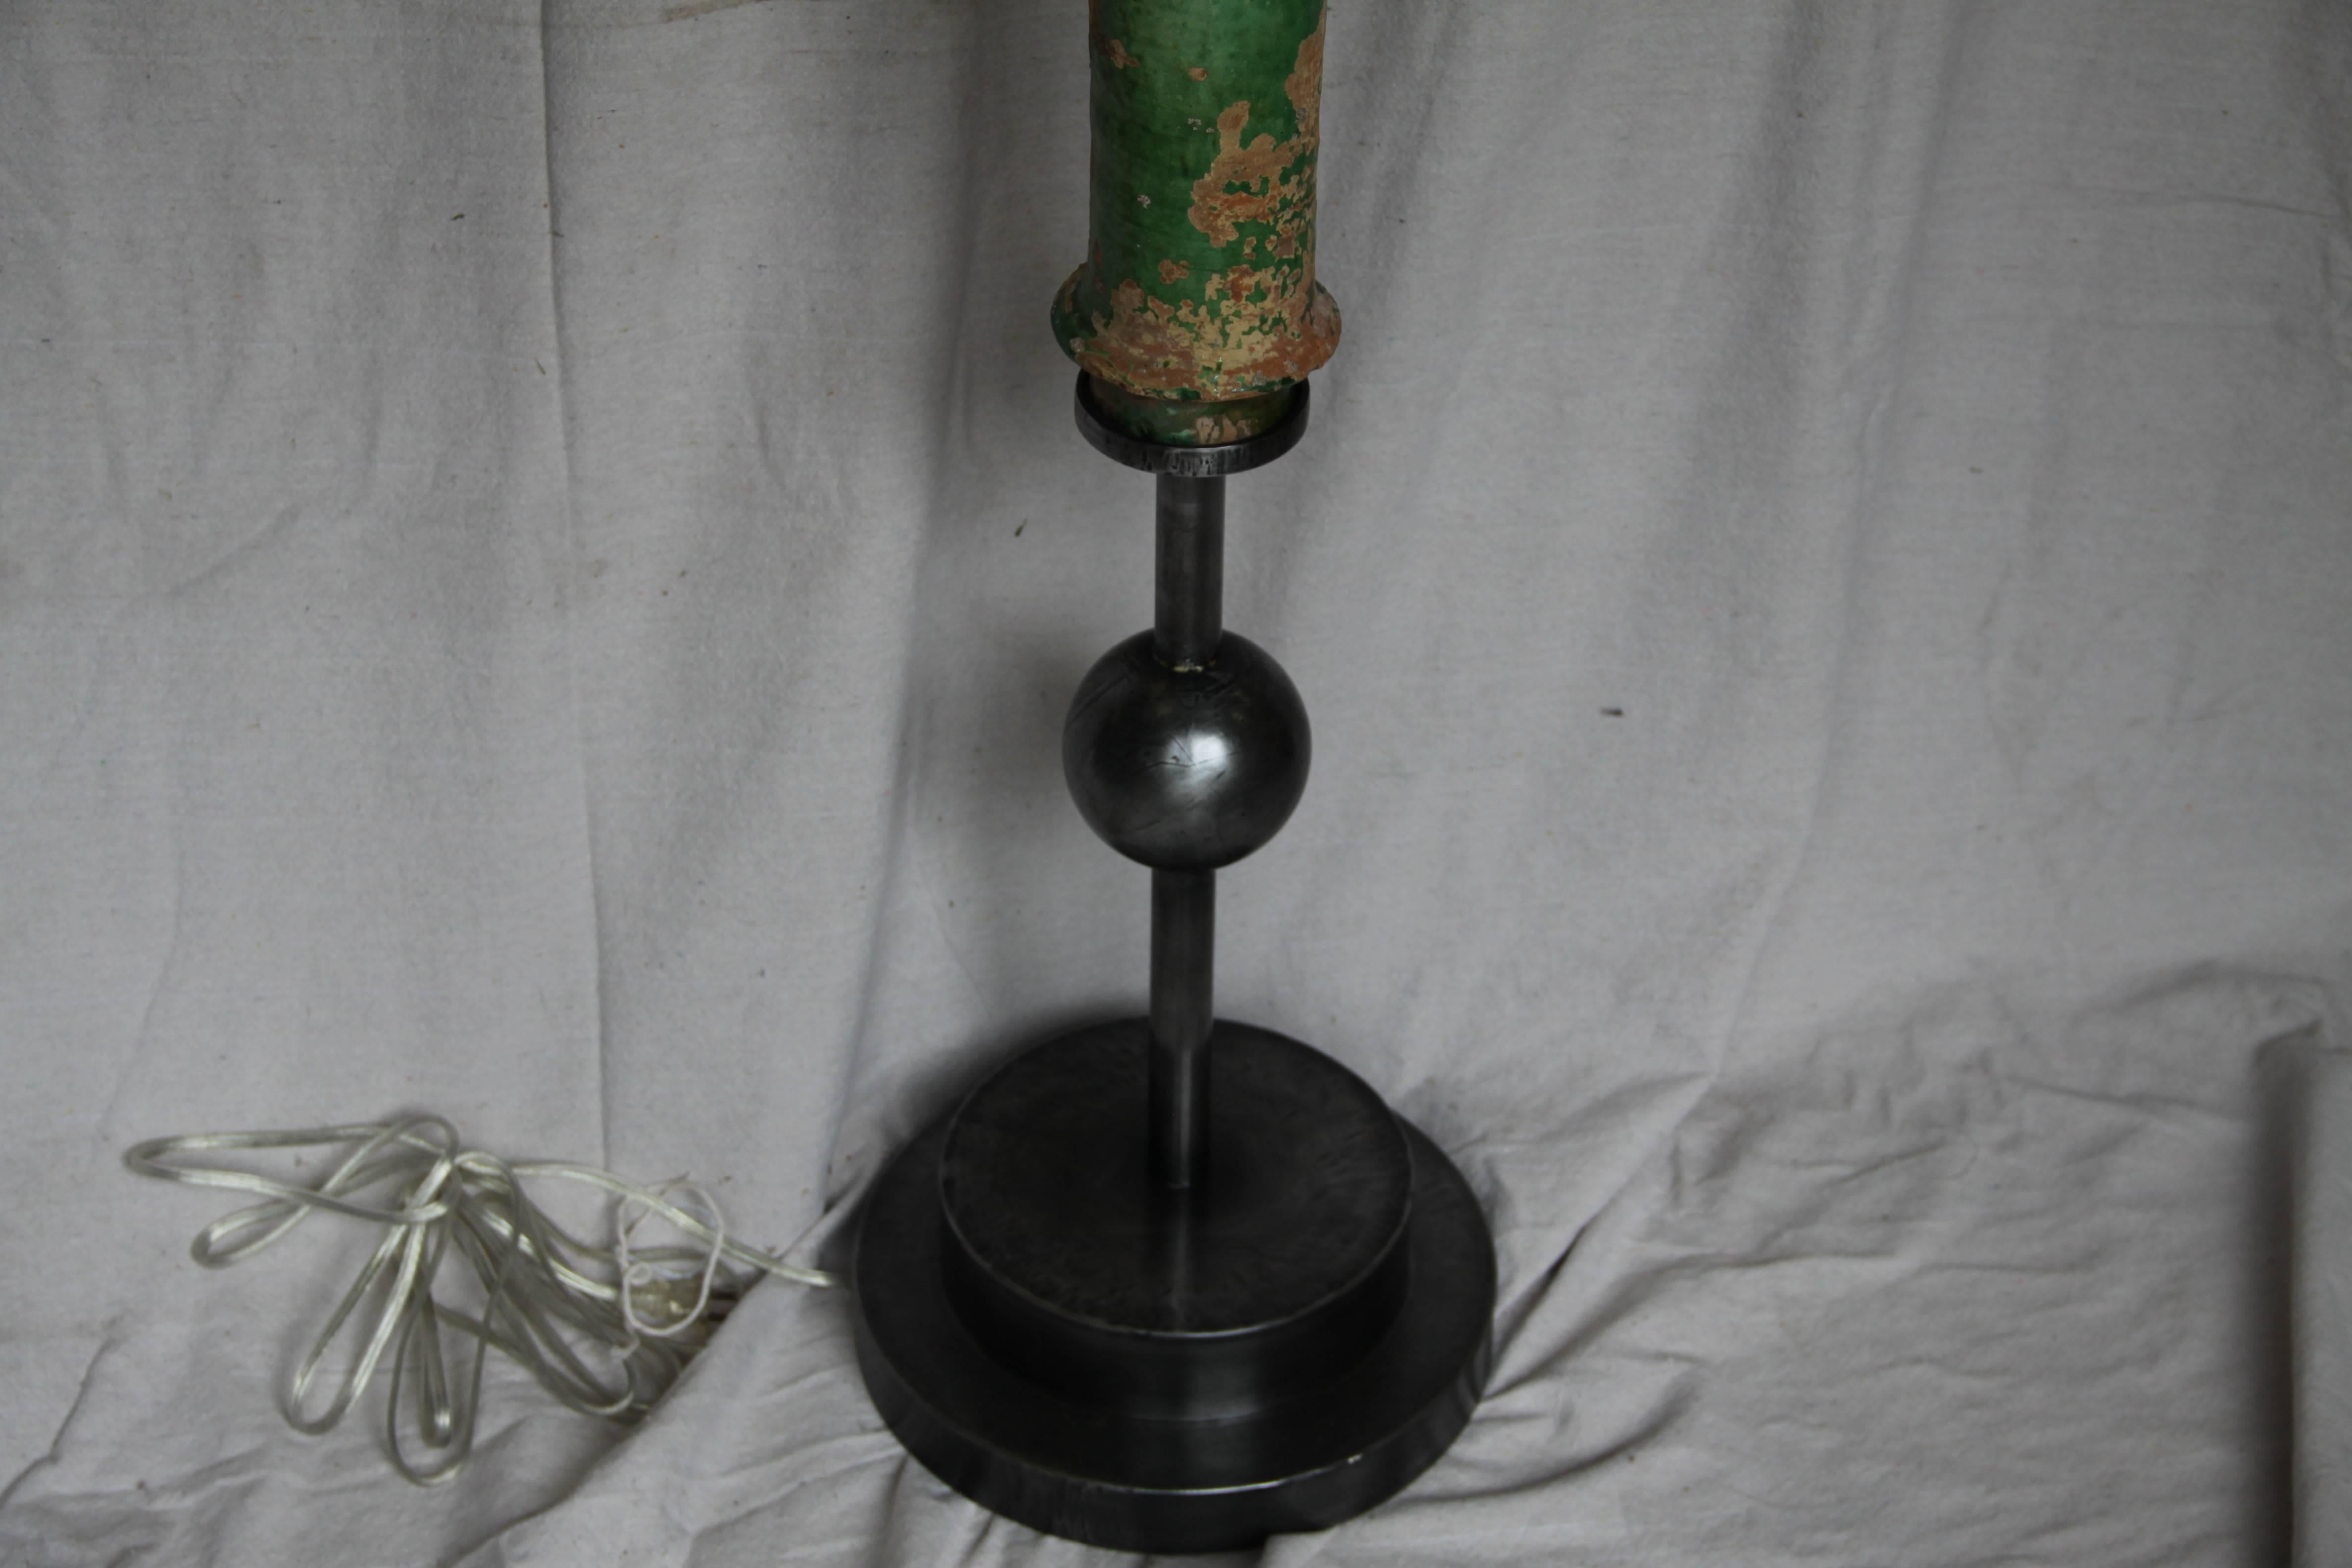 19th Century Floor Lamp from Terracotta Downspout